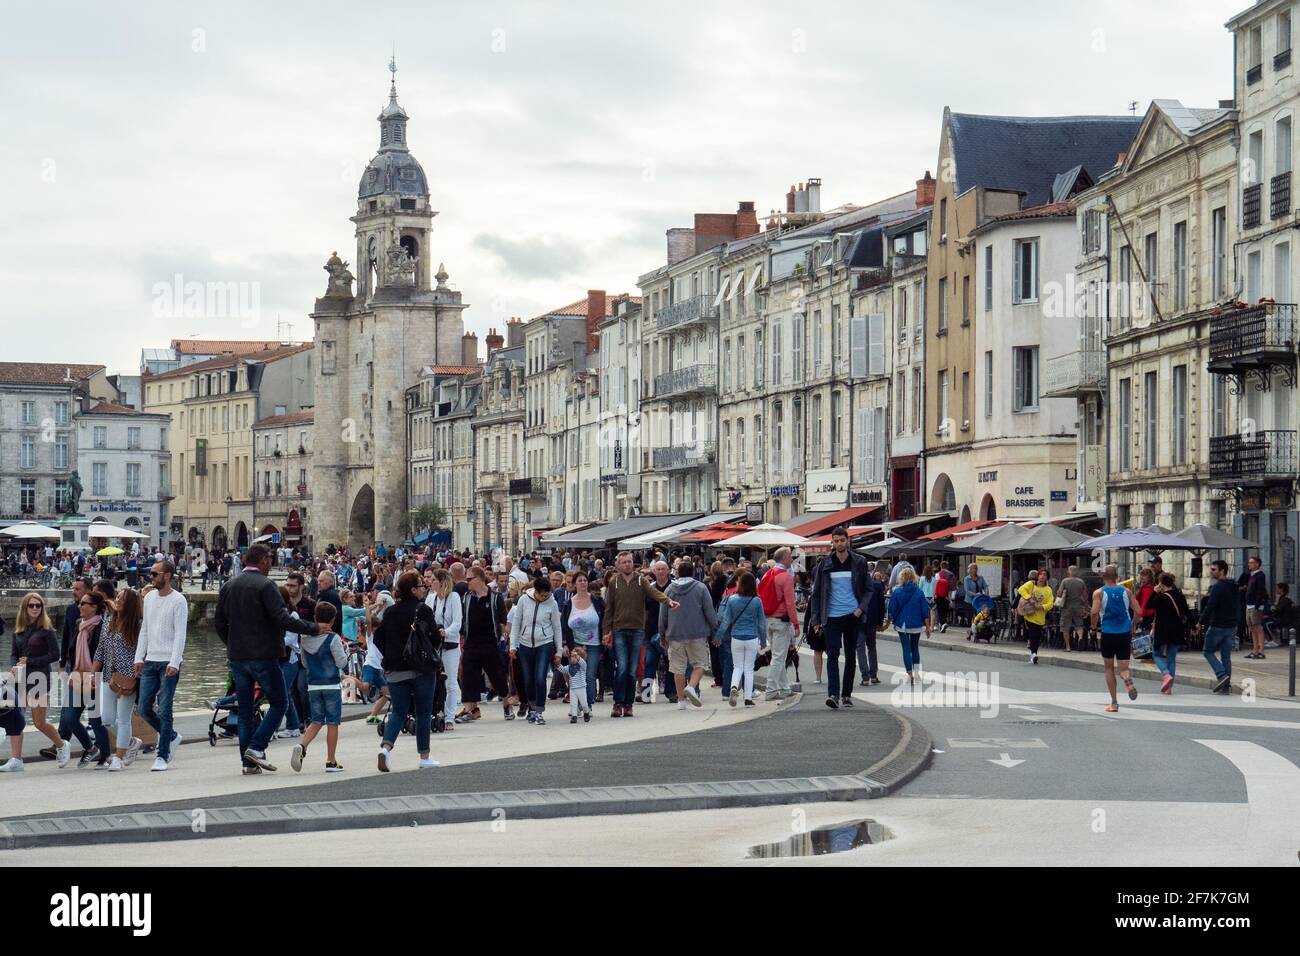 La Rochelle, France - August 25th 2018: Liveliness around the inner city harbour Stock Photo